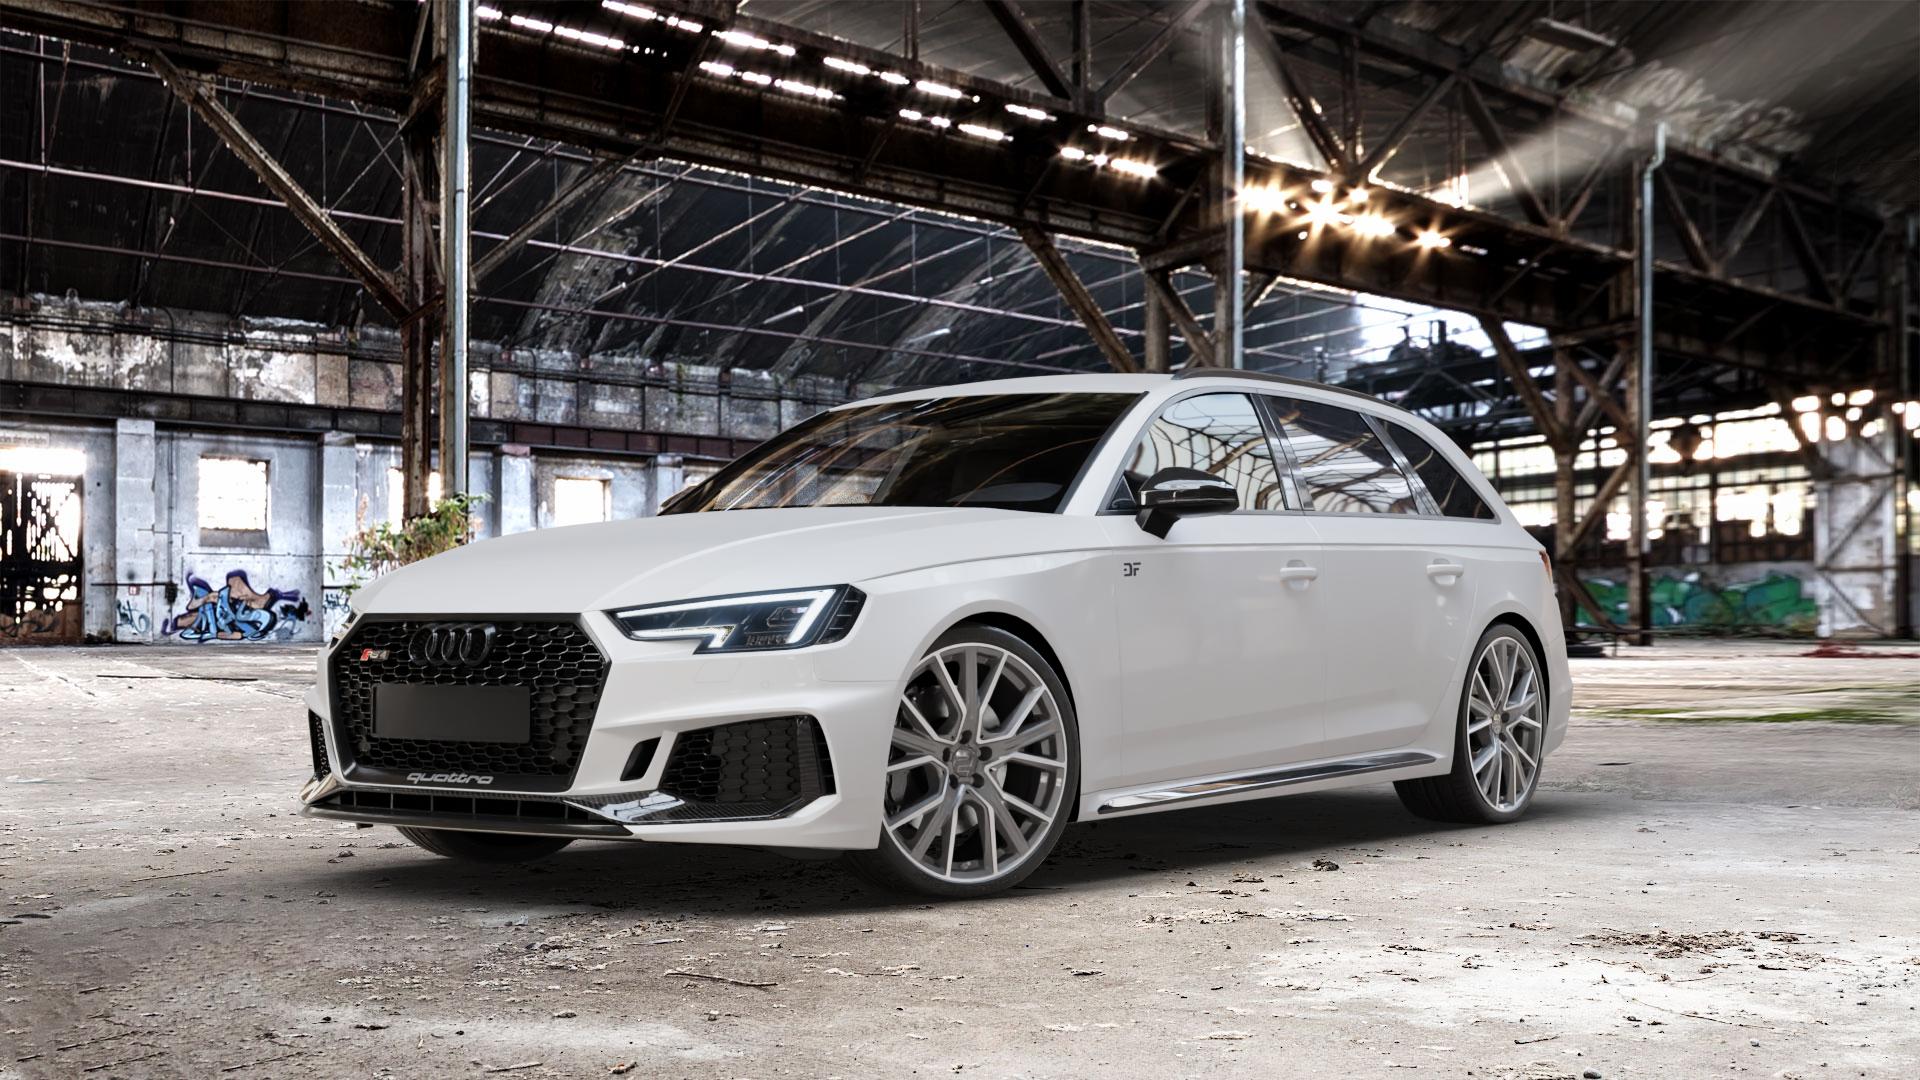 Audi A4 Type B9 (Avant) 2,9l RS4 TFSI quattro 331kW (450 hp) Wheels and  Tyre Packages